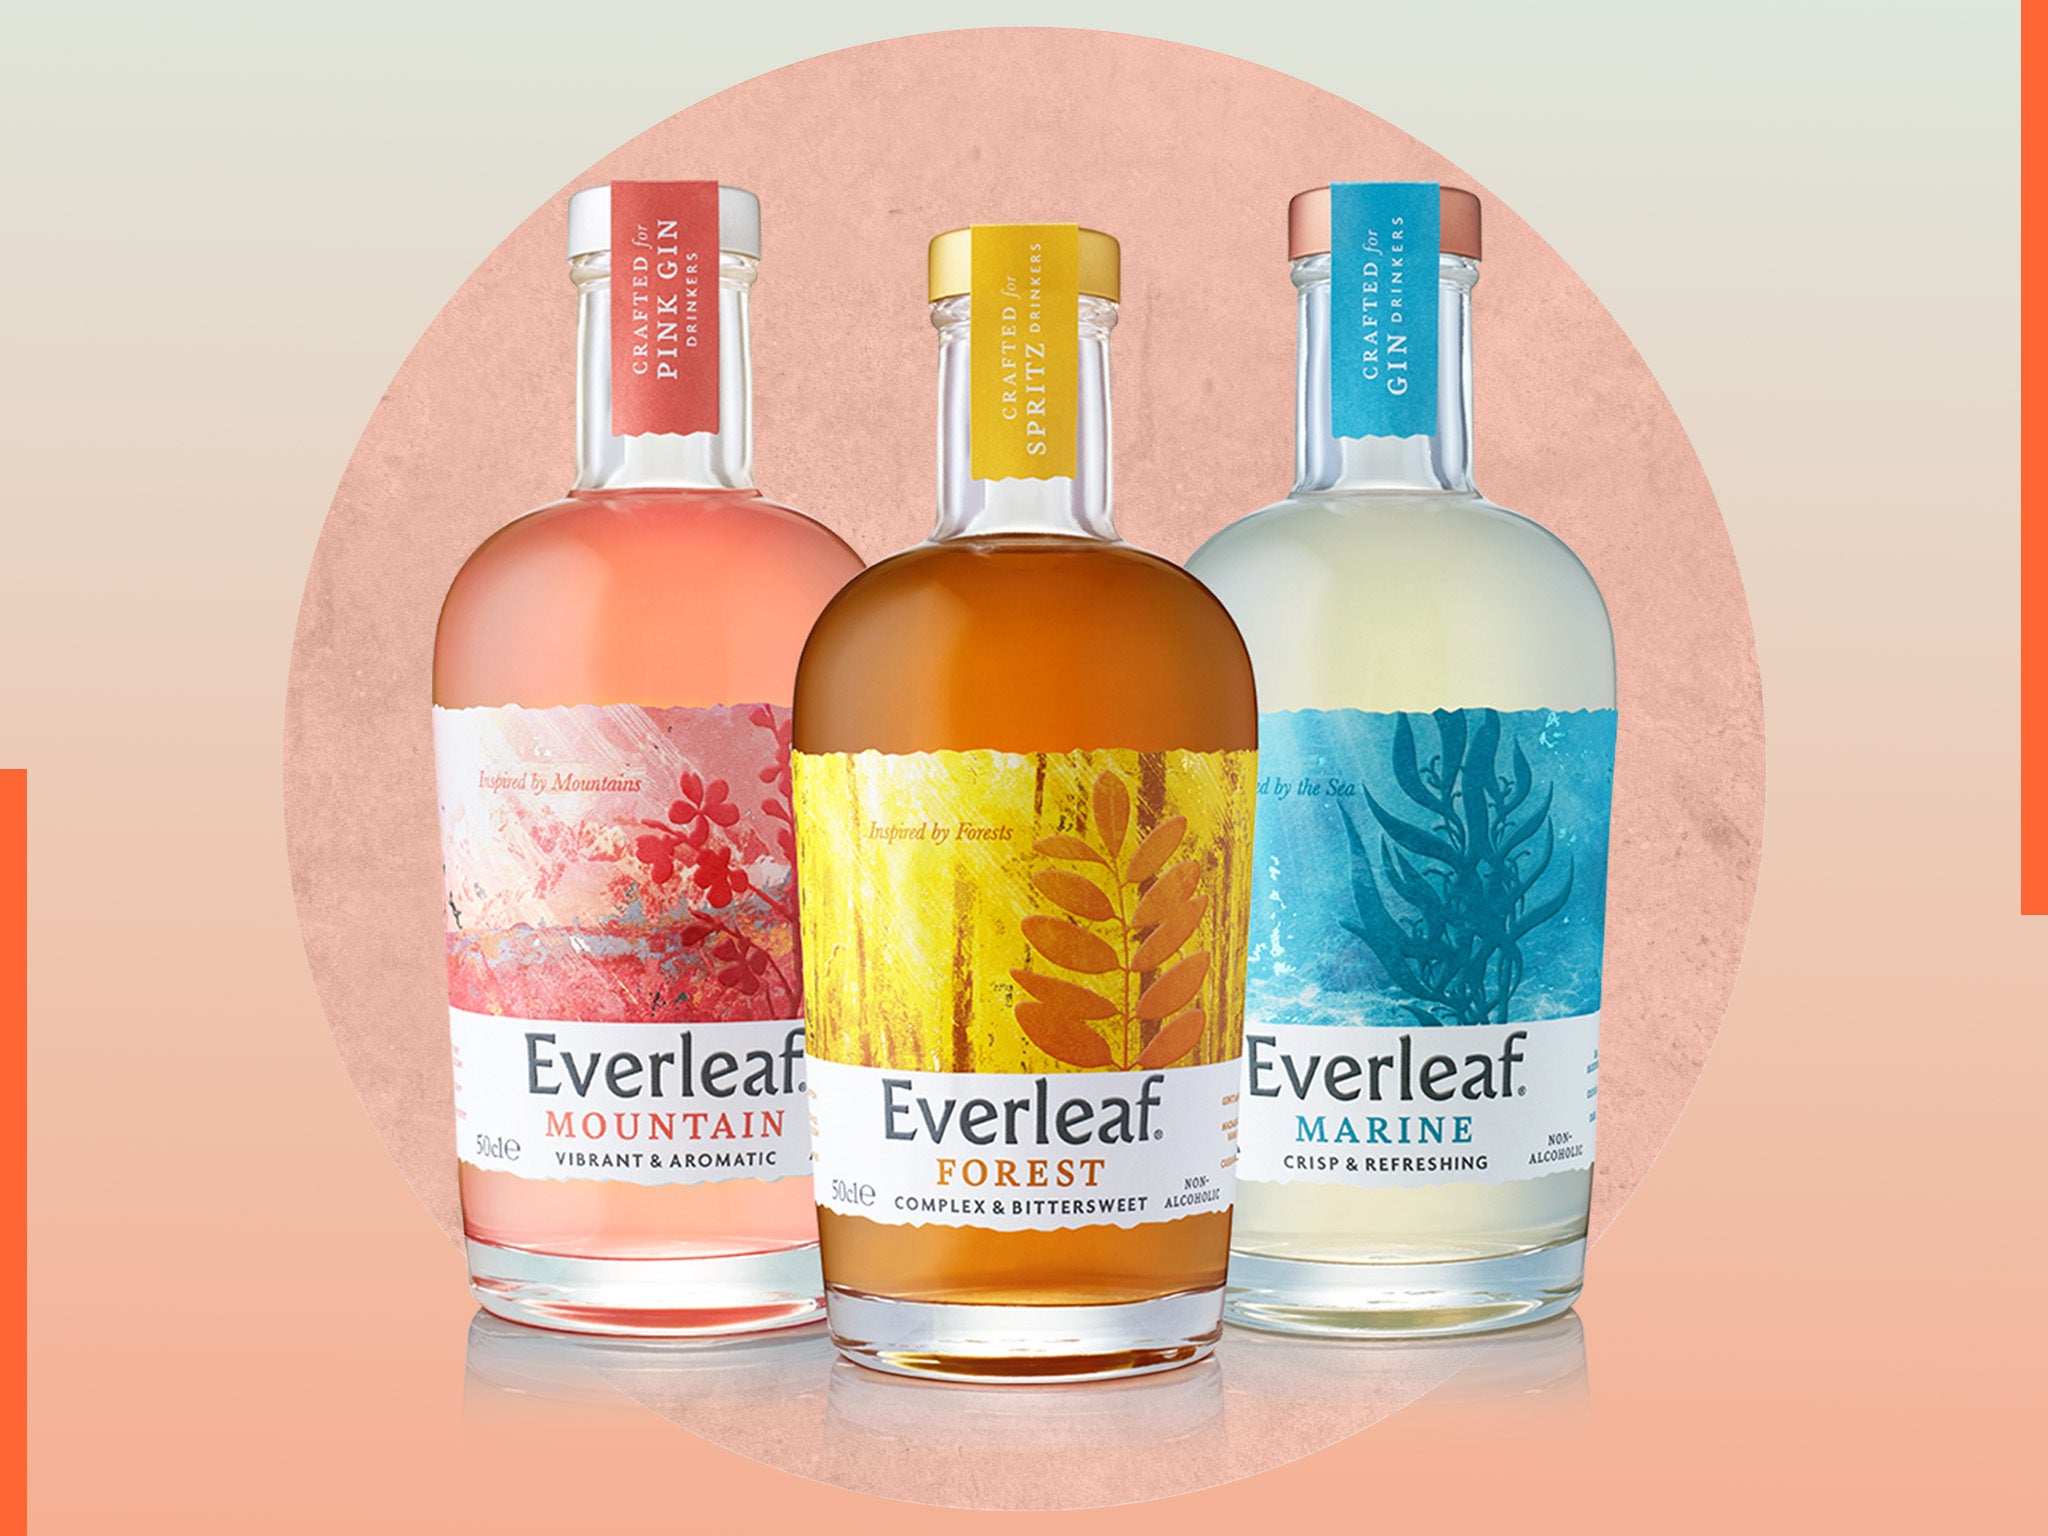 We tried Everleaf’s non-alcoholic drinks to see if they could replace the real deal